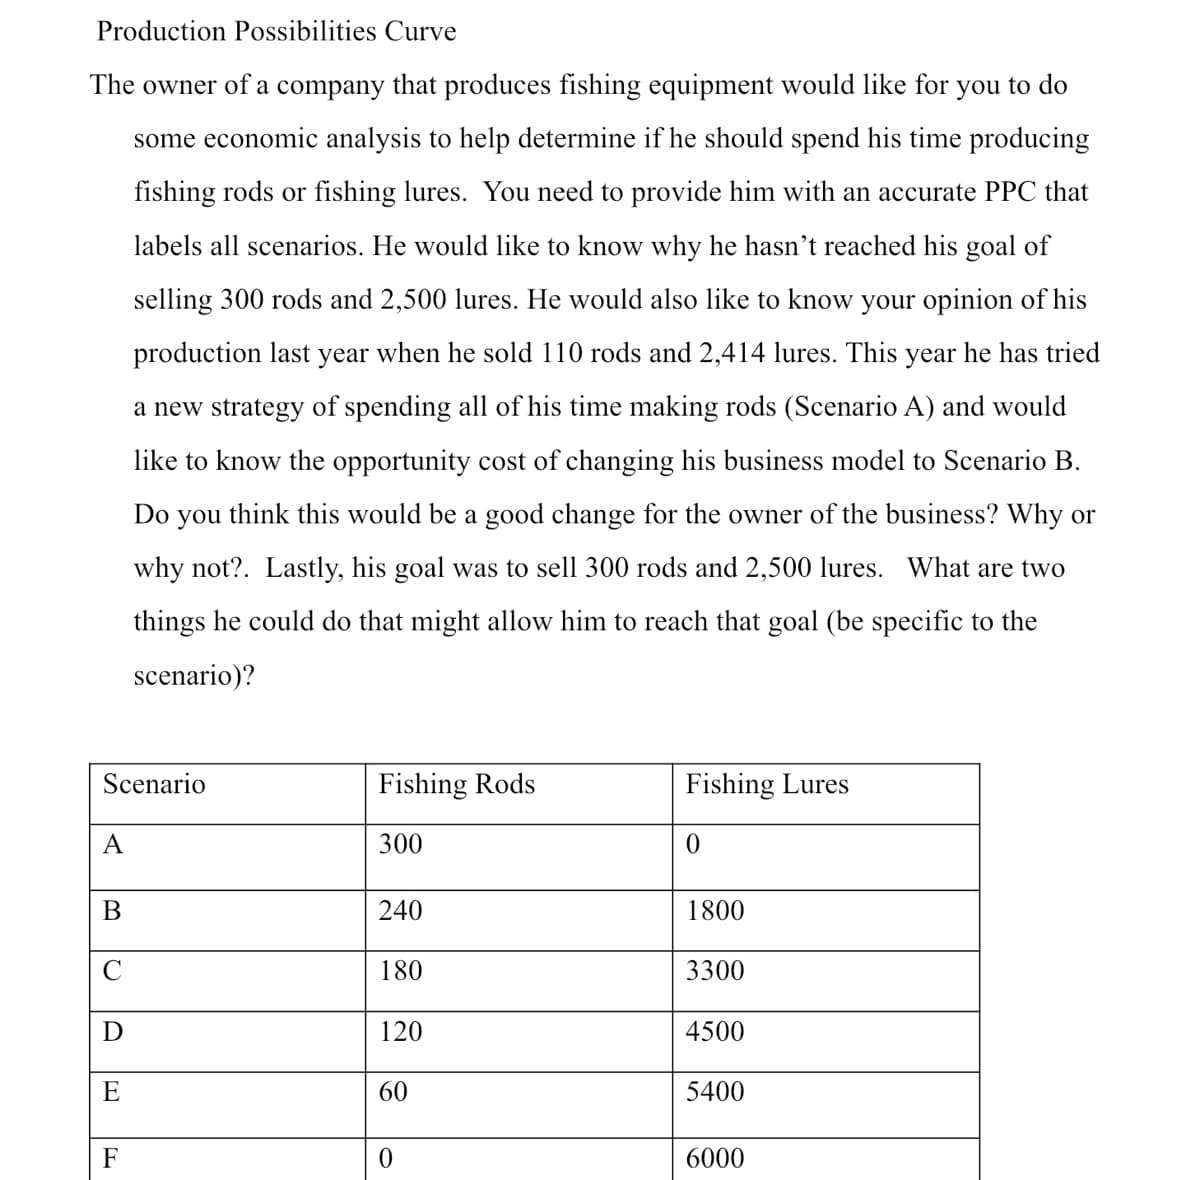 Production Possibilities Curve
The owner of a company that produces fishing equipment would like for you to do
some economic analysis to help determine if he should spend his time producing
fishing rods or fishing lures. You need to provide him with an accurate PPC that
labels all scenarios. He would like to know why he hasn't reached his goal of
selling 300 rods and 2,500 lures. He would also like to know your opinion of his
production last year when he sold 110 rods and 2,414 lures. This year he has tried
a new strategy of spending all of his time making rods (Scenario A) and would
like to know the opportunity cost of changing his business model to Scenario B.
Do you think this would be a good change for the owner of the business? Why or
why not?. Lastly, his goal was to sell 300 rods and 2,500 lures. What are two
things he could do that might allow him to reach that goal (be specific to the
scenario)?
Scenario
A
B
C
D
E
F
Fishing Rods
300
240
180
120
60
0
Fishing Lures
0
1800
3300
4500
5400
6000